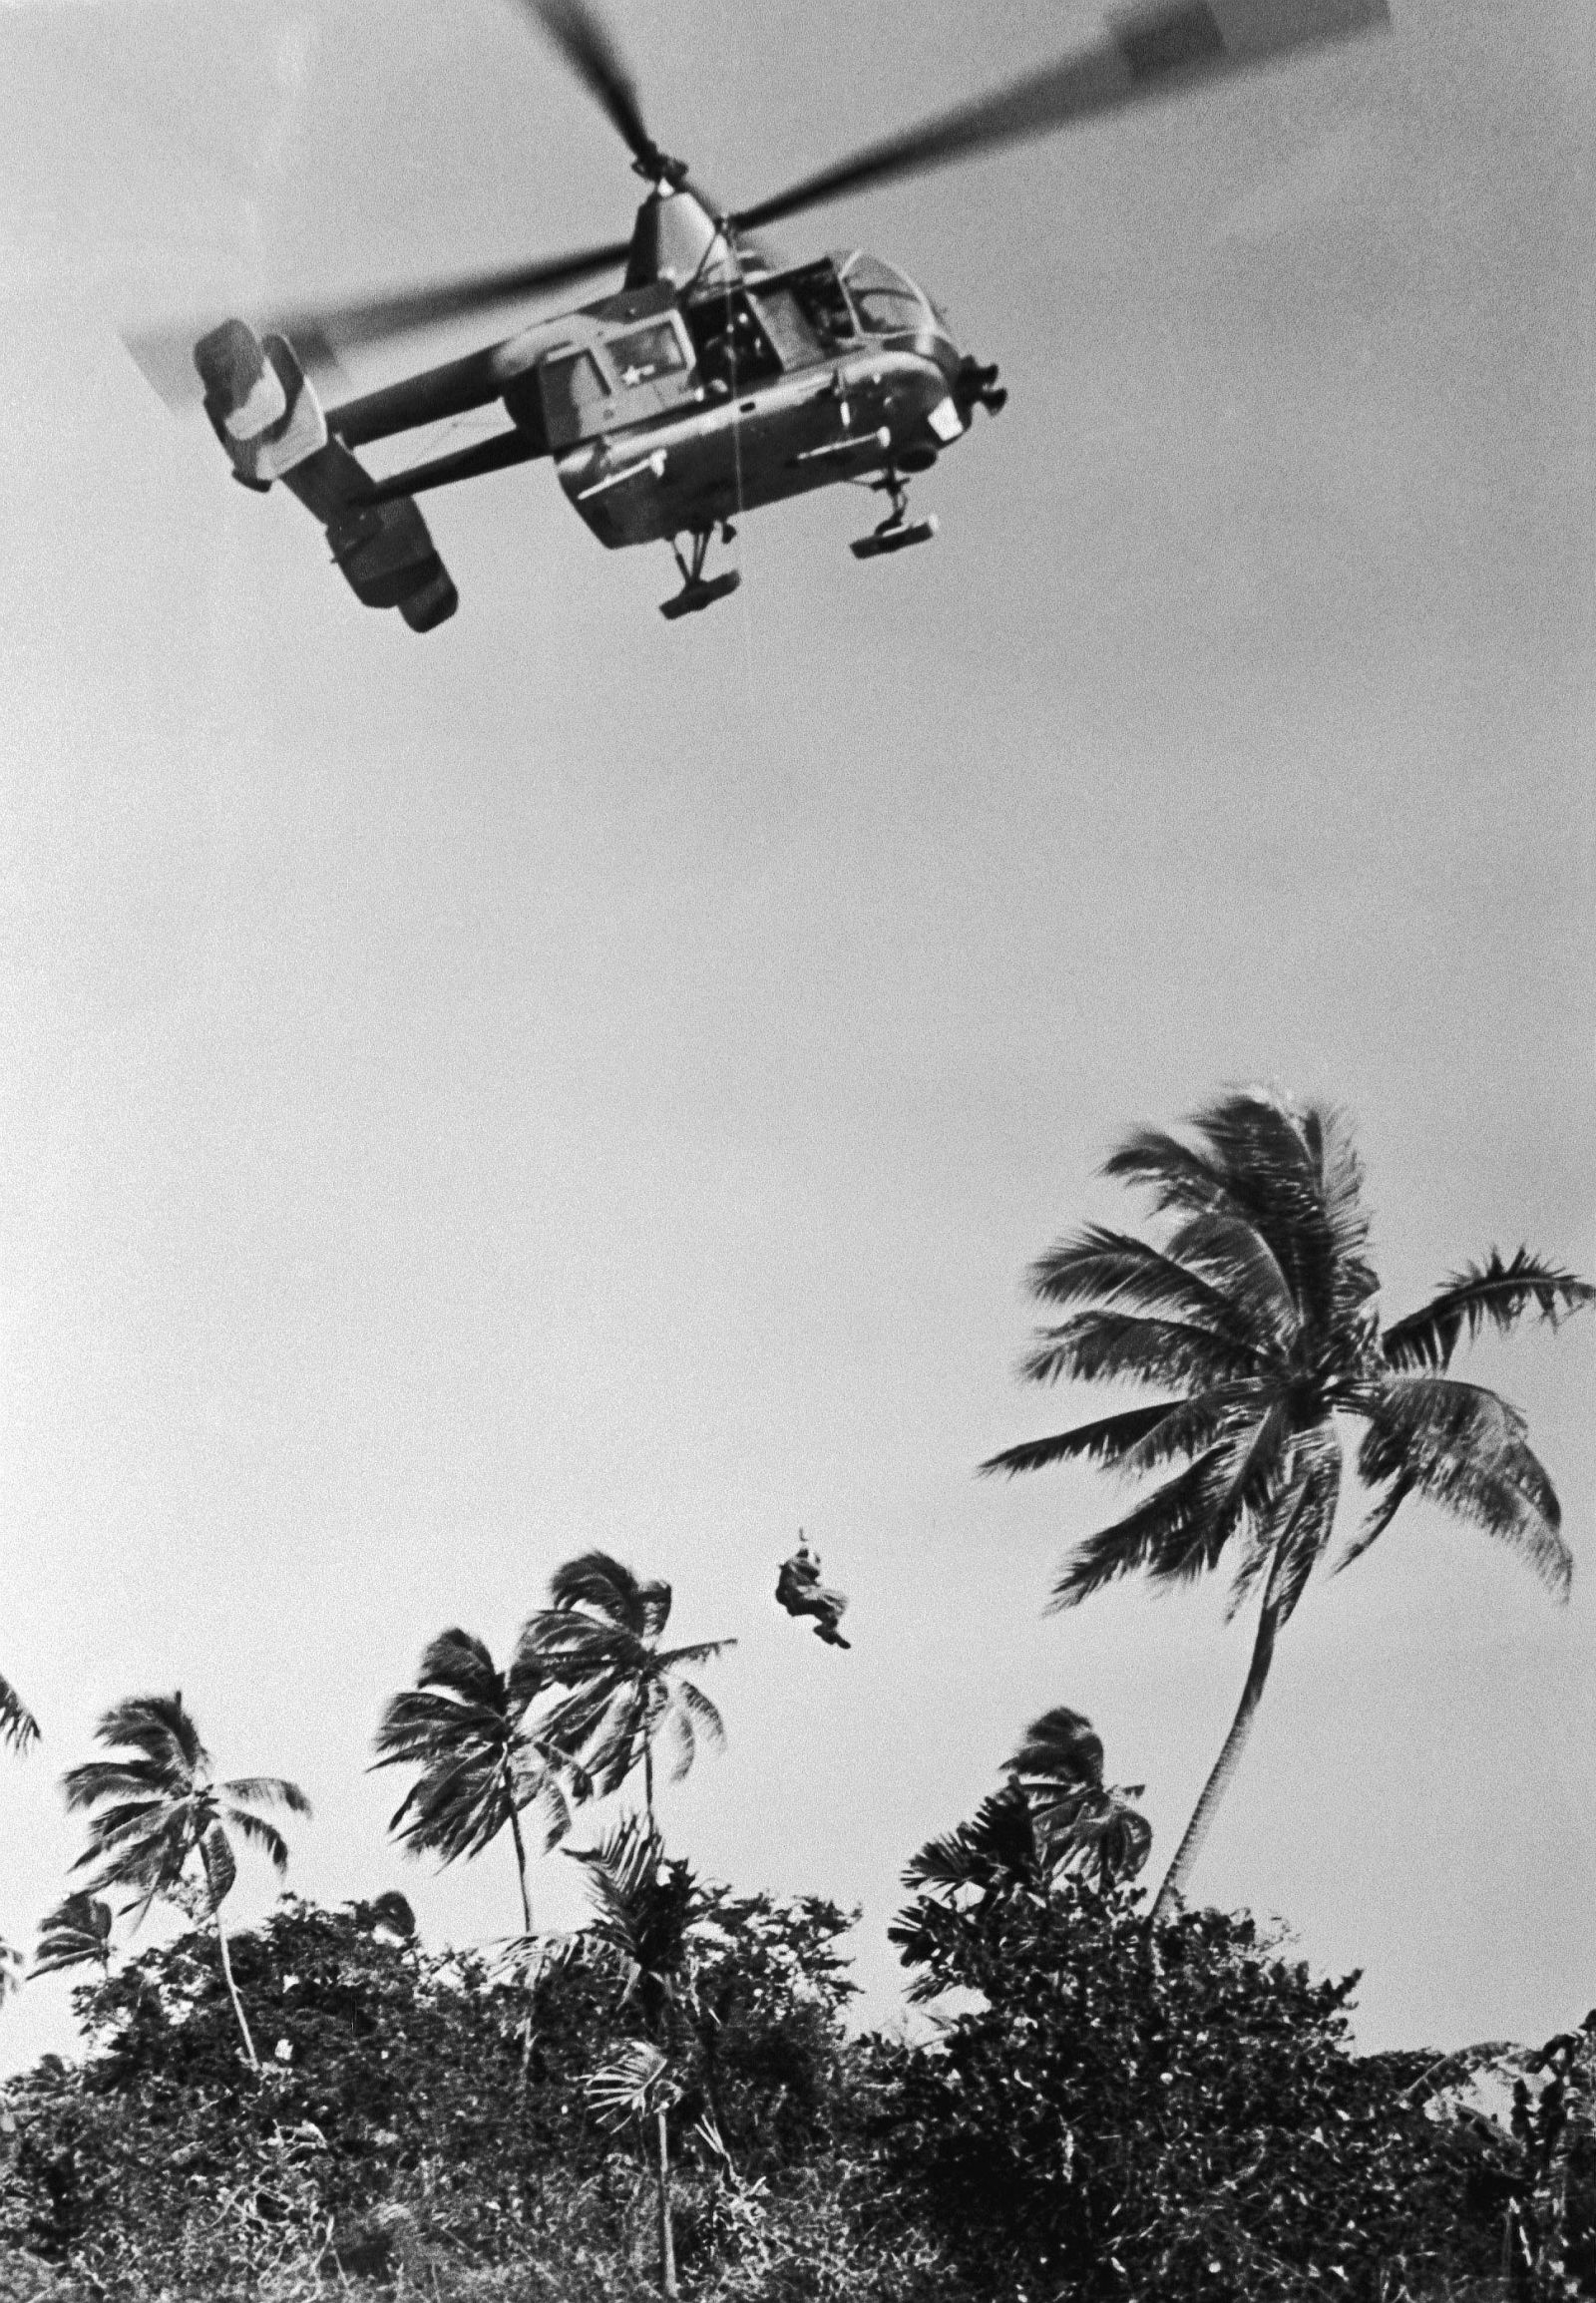 A U.S. Air Force Kaman HH-43B Huskie helicopter is used to rescue a downed airman from the jungles in Southeast Asia, 19 December 1968.